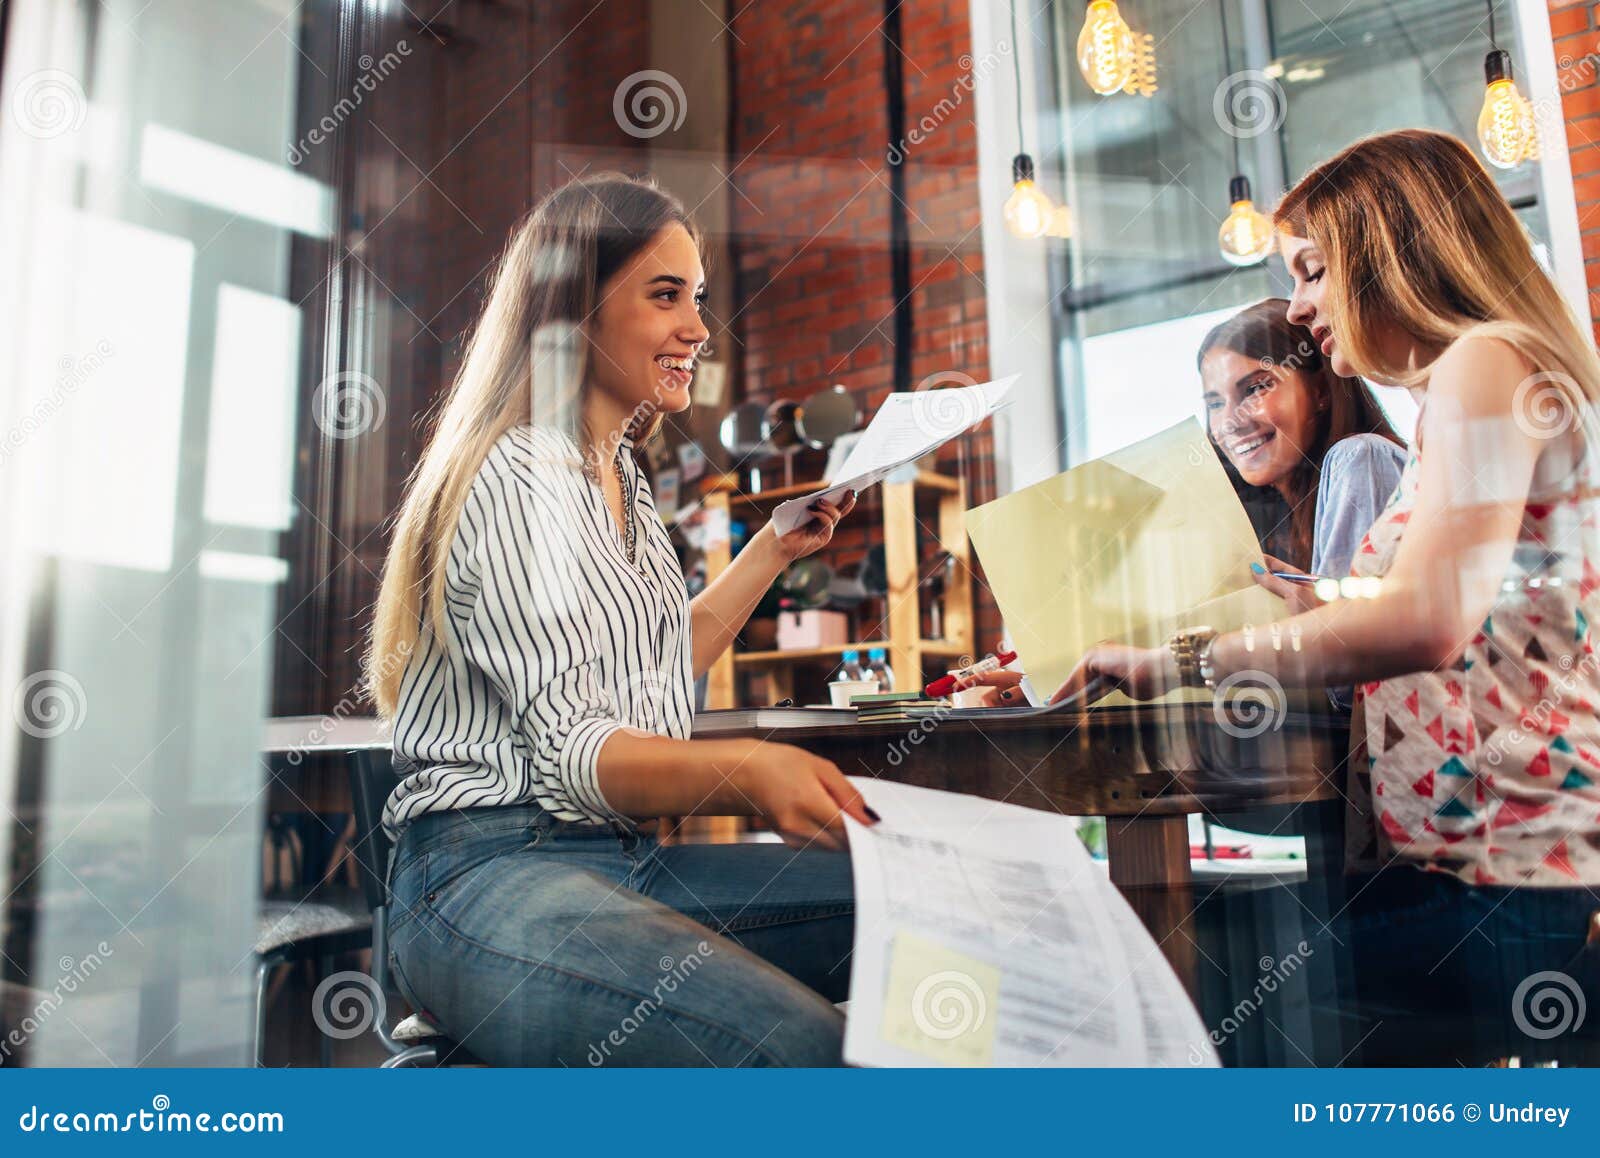 college female students sitting at table working on school assignment in a library